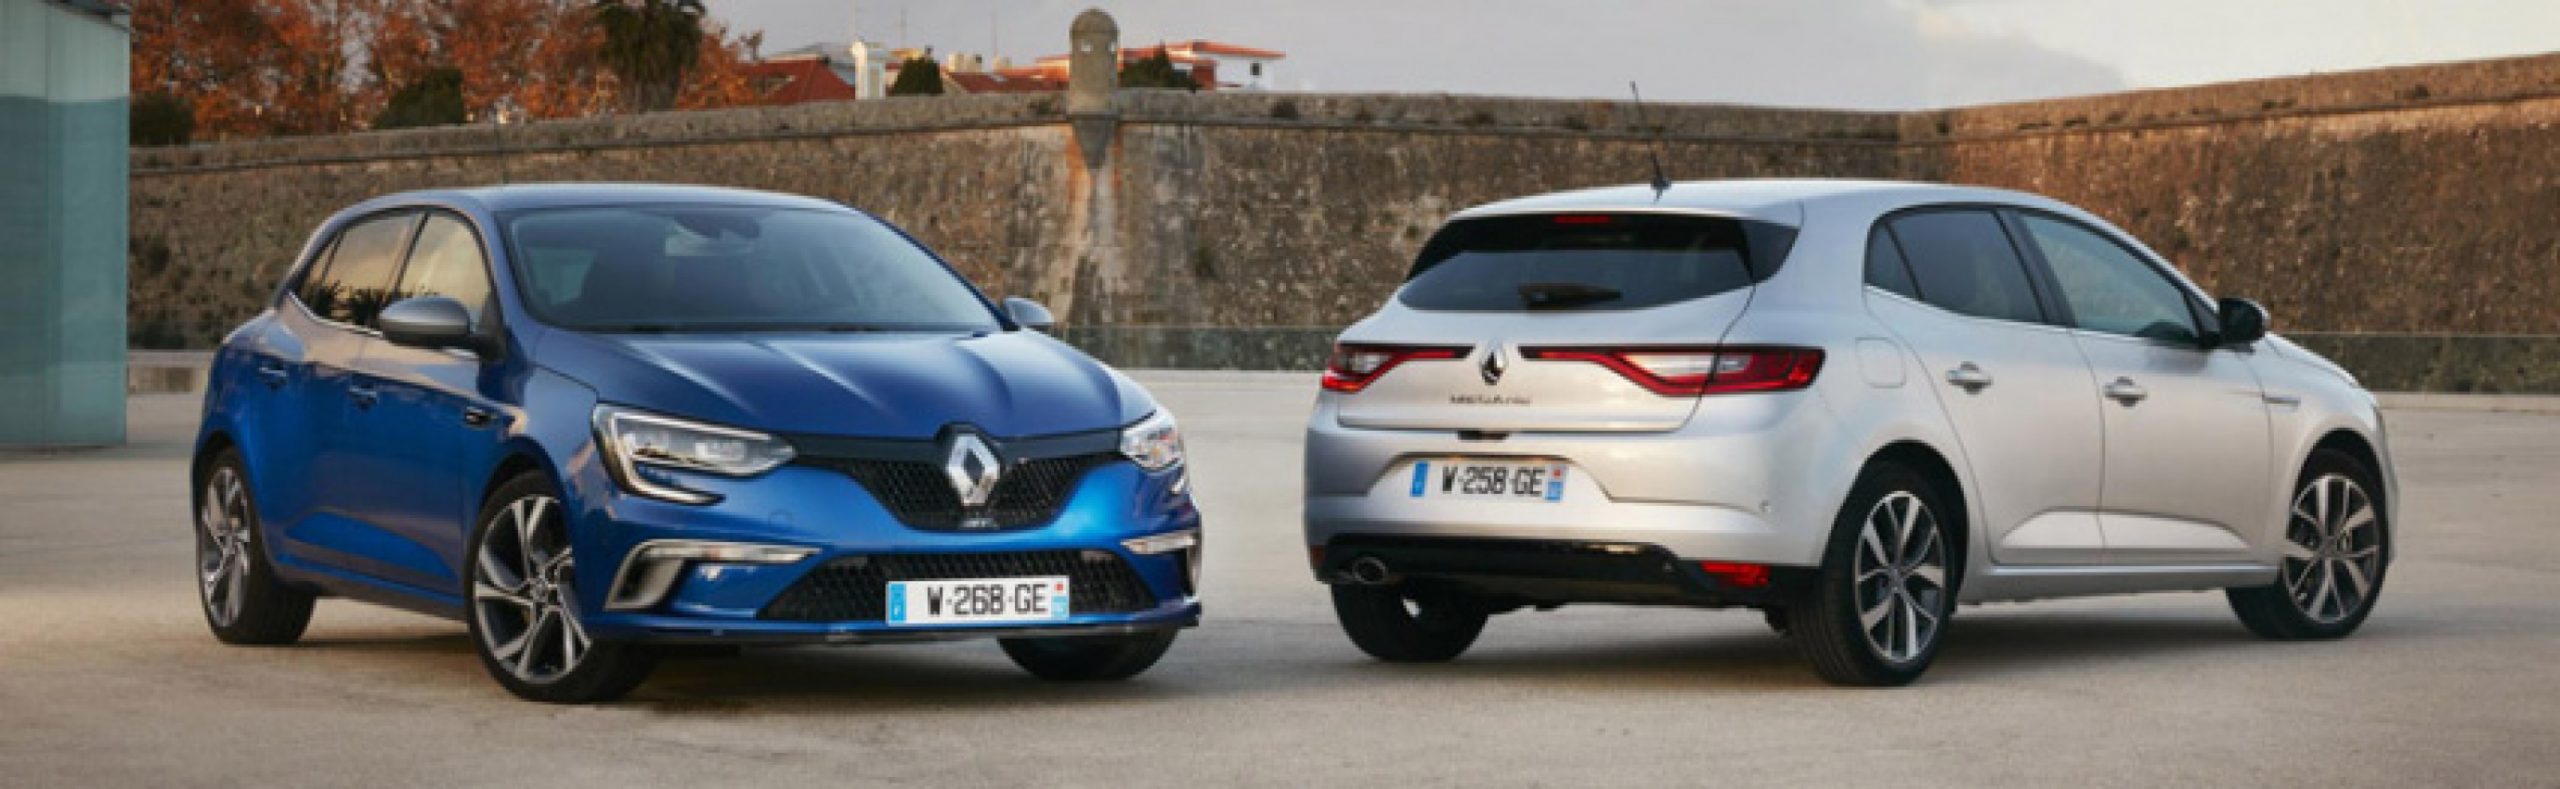 autos, cars, renault, renault reveals details for the new megane! trim levels, performance and additional features: what do we know so far